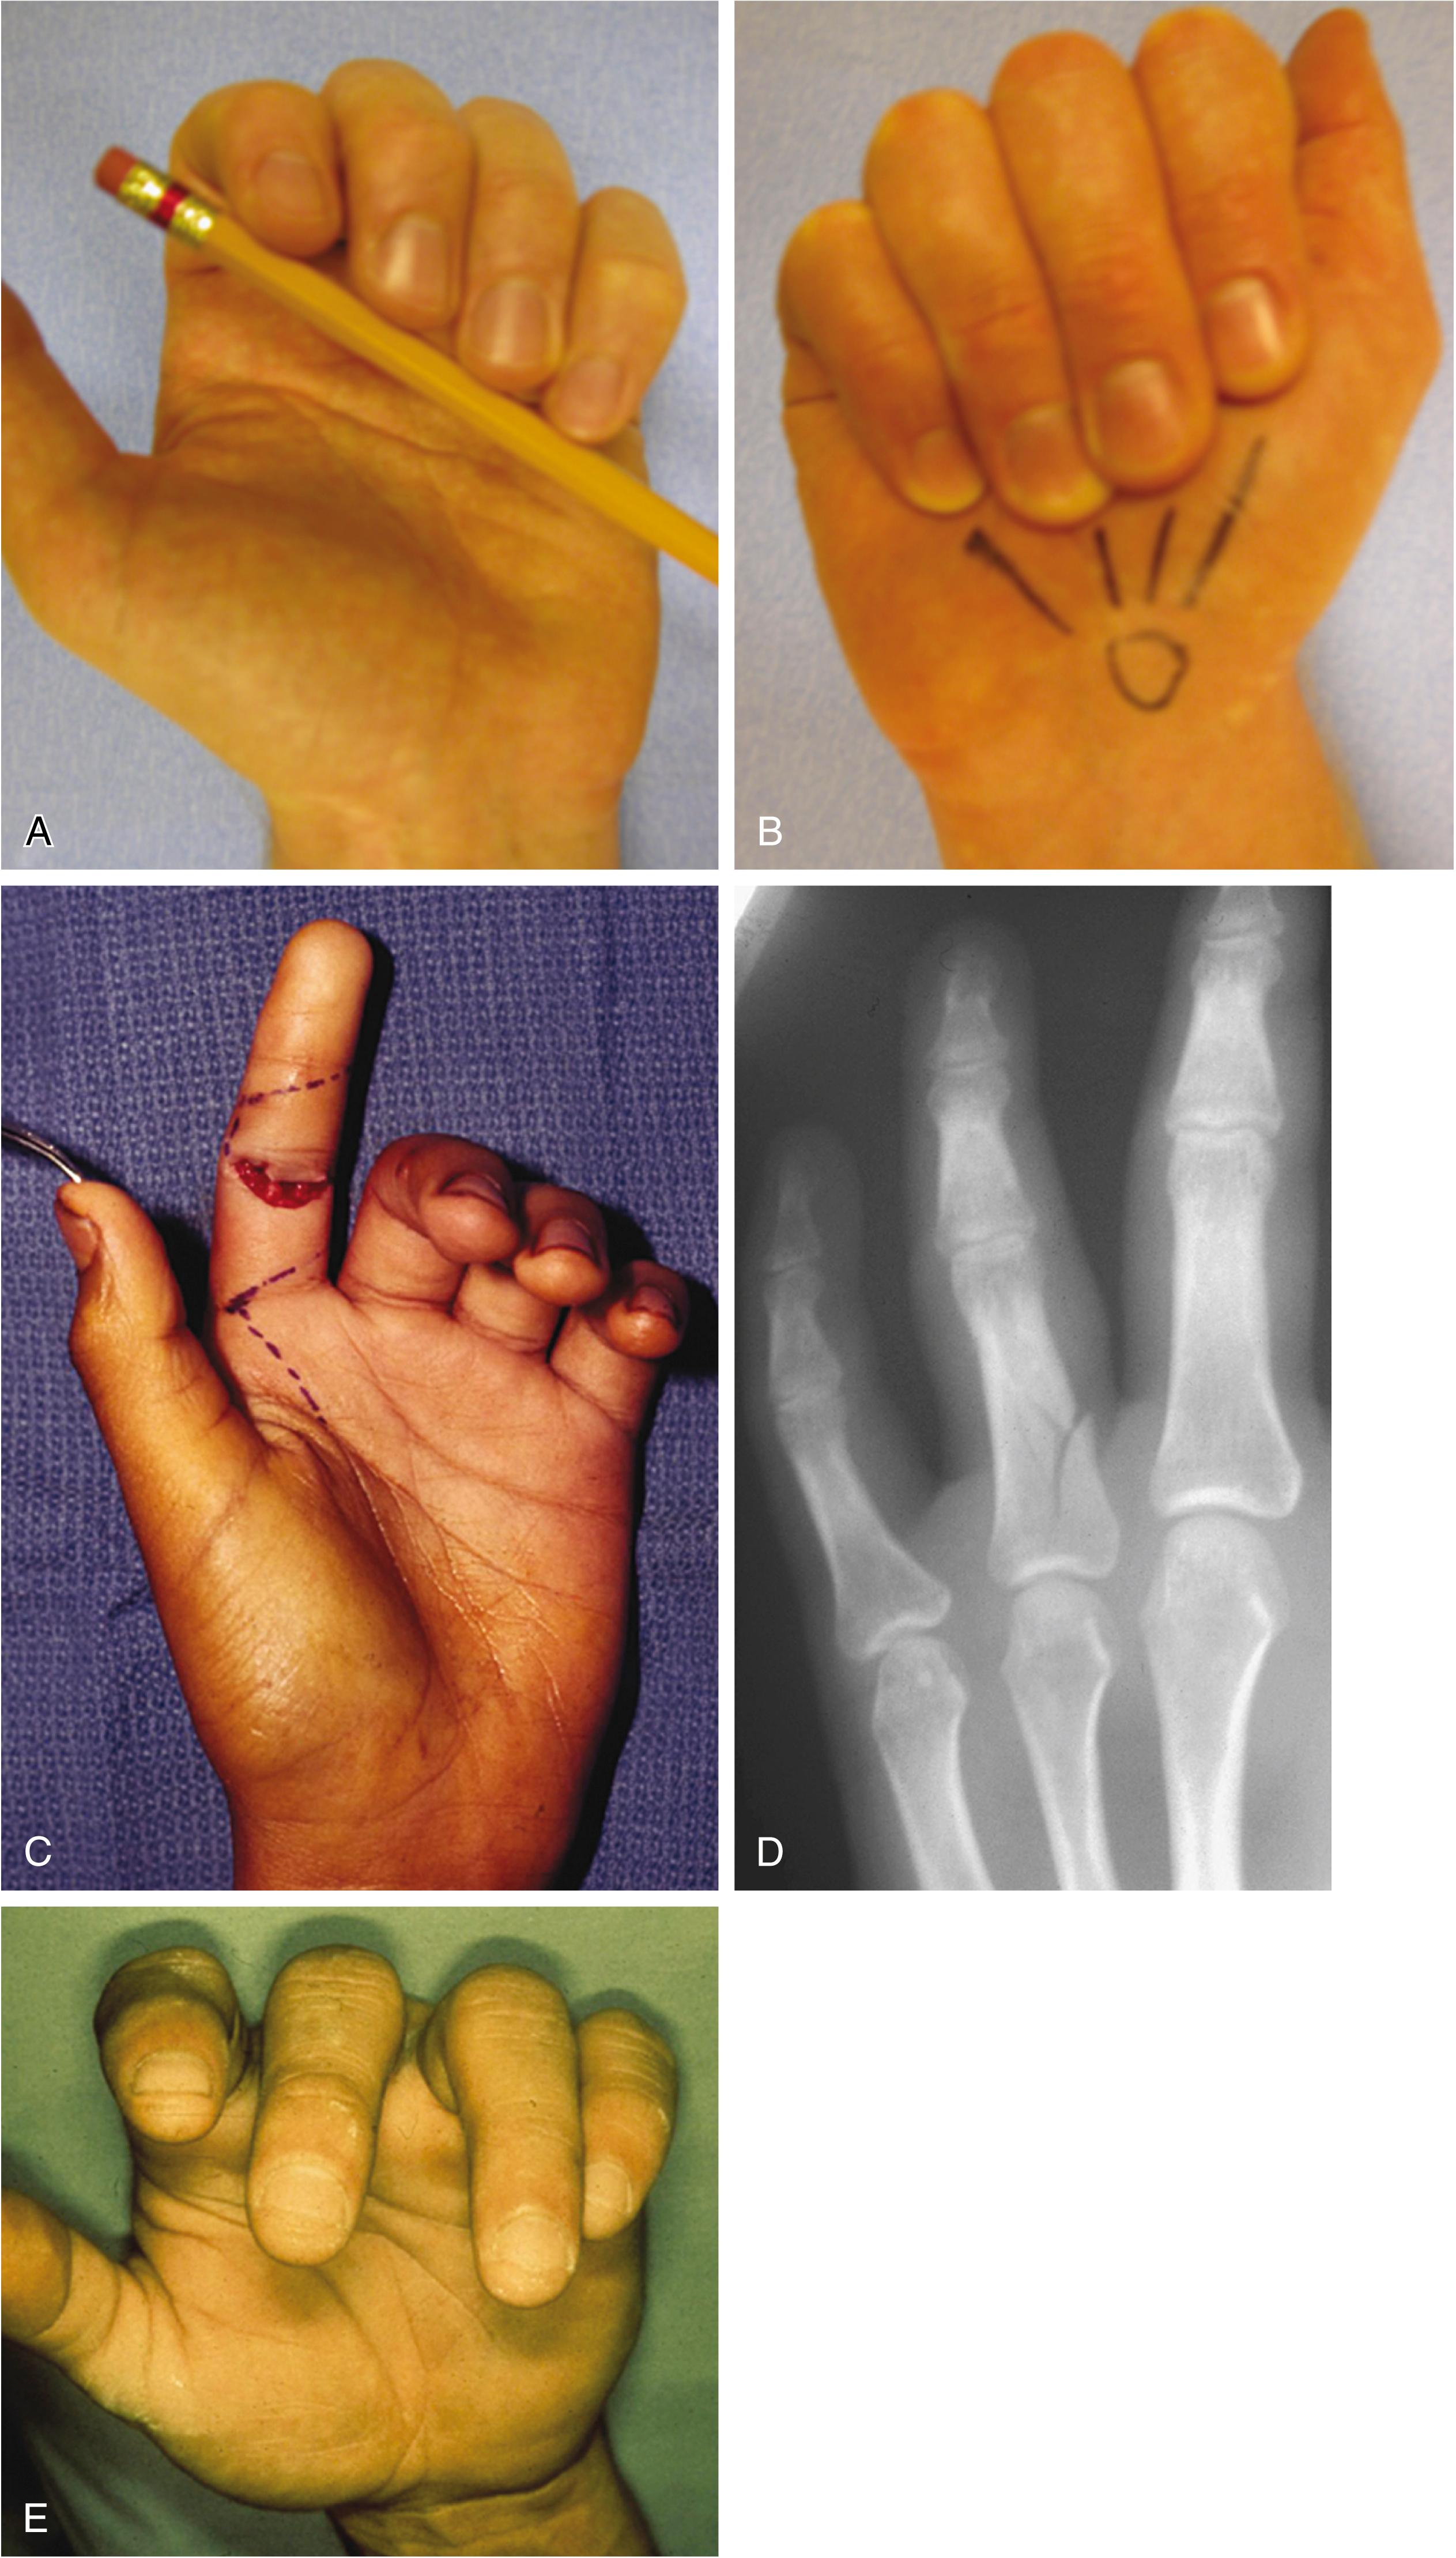 Fig. 70.7, (A and B) Natural finger flexion cascade of the hand in repose. Note the fingertips pointing to the distal pole of the scaphoid. (C) With flexor tendon injury, the affected digit does not adopt this resting flexed posture. (D and E) Spiral finger fractures produce a rotational deformity, which is also noted as an interruption in the finger flexion cascade.